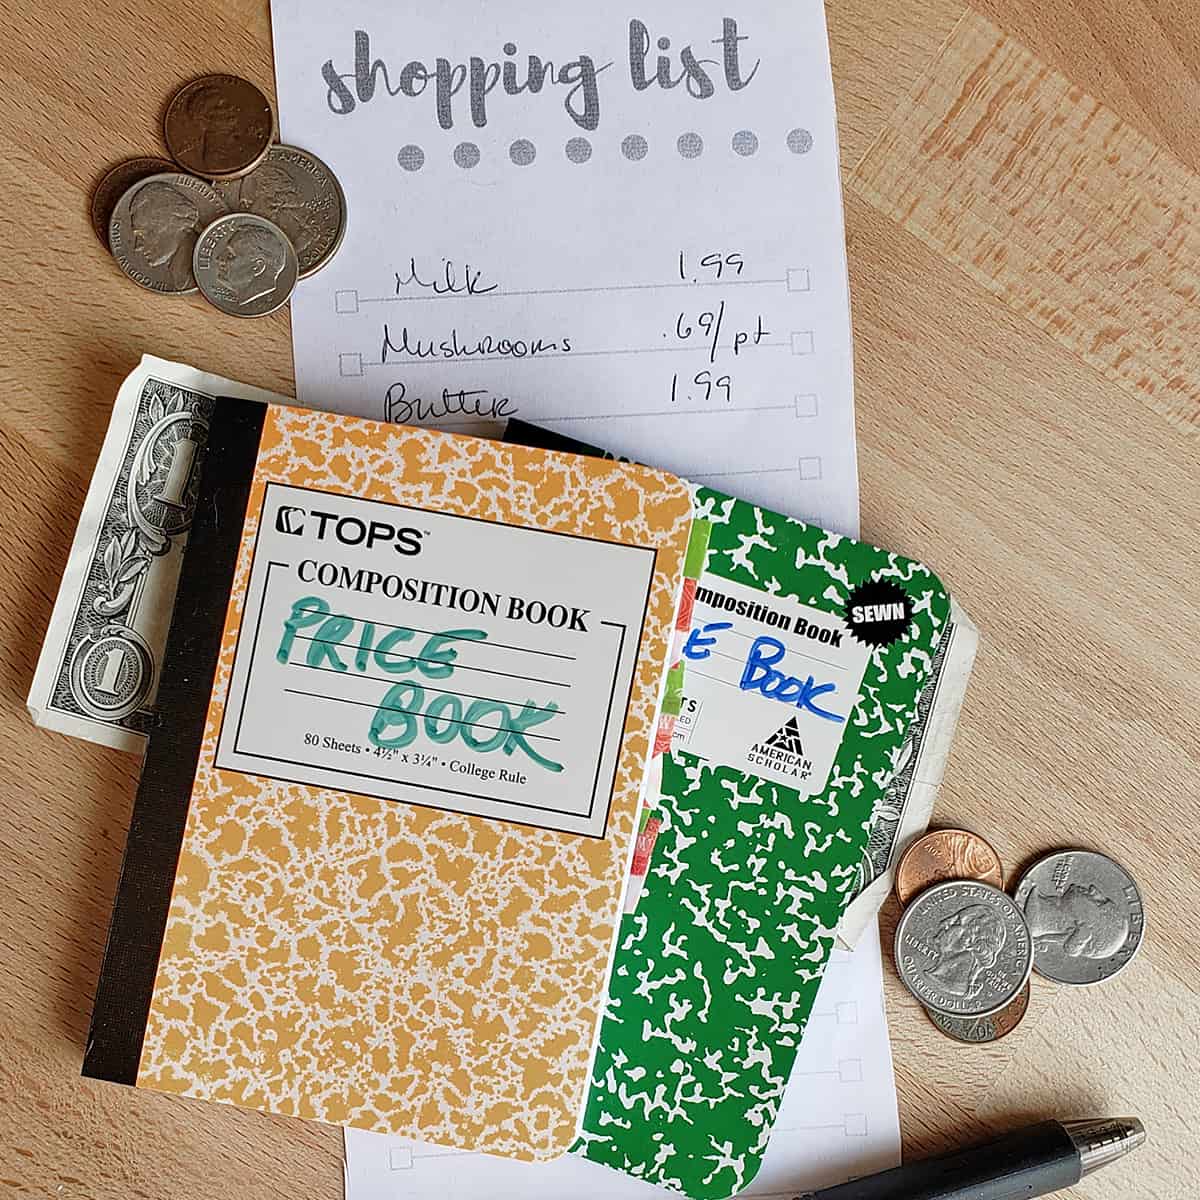 2 small price book examples on a table with scattered money and a shopping list